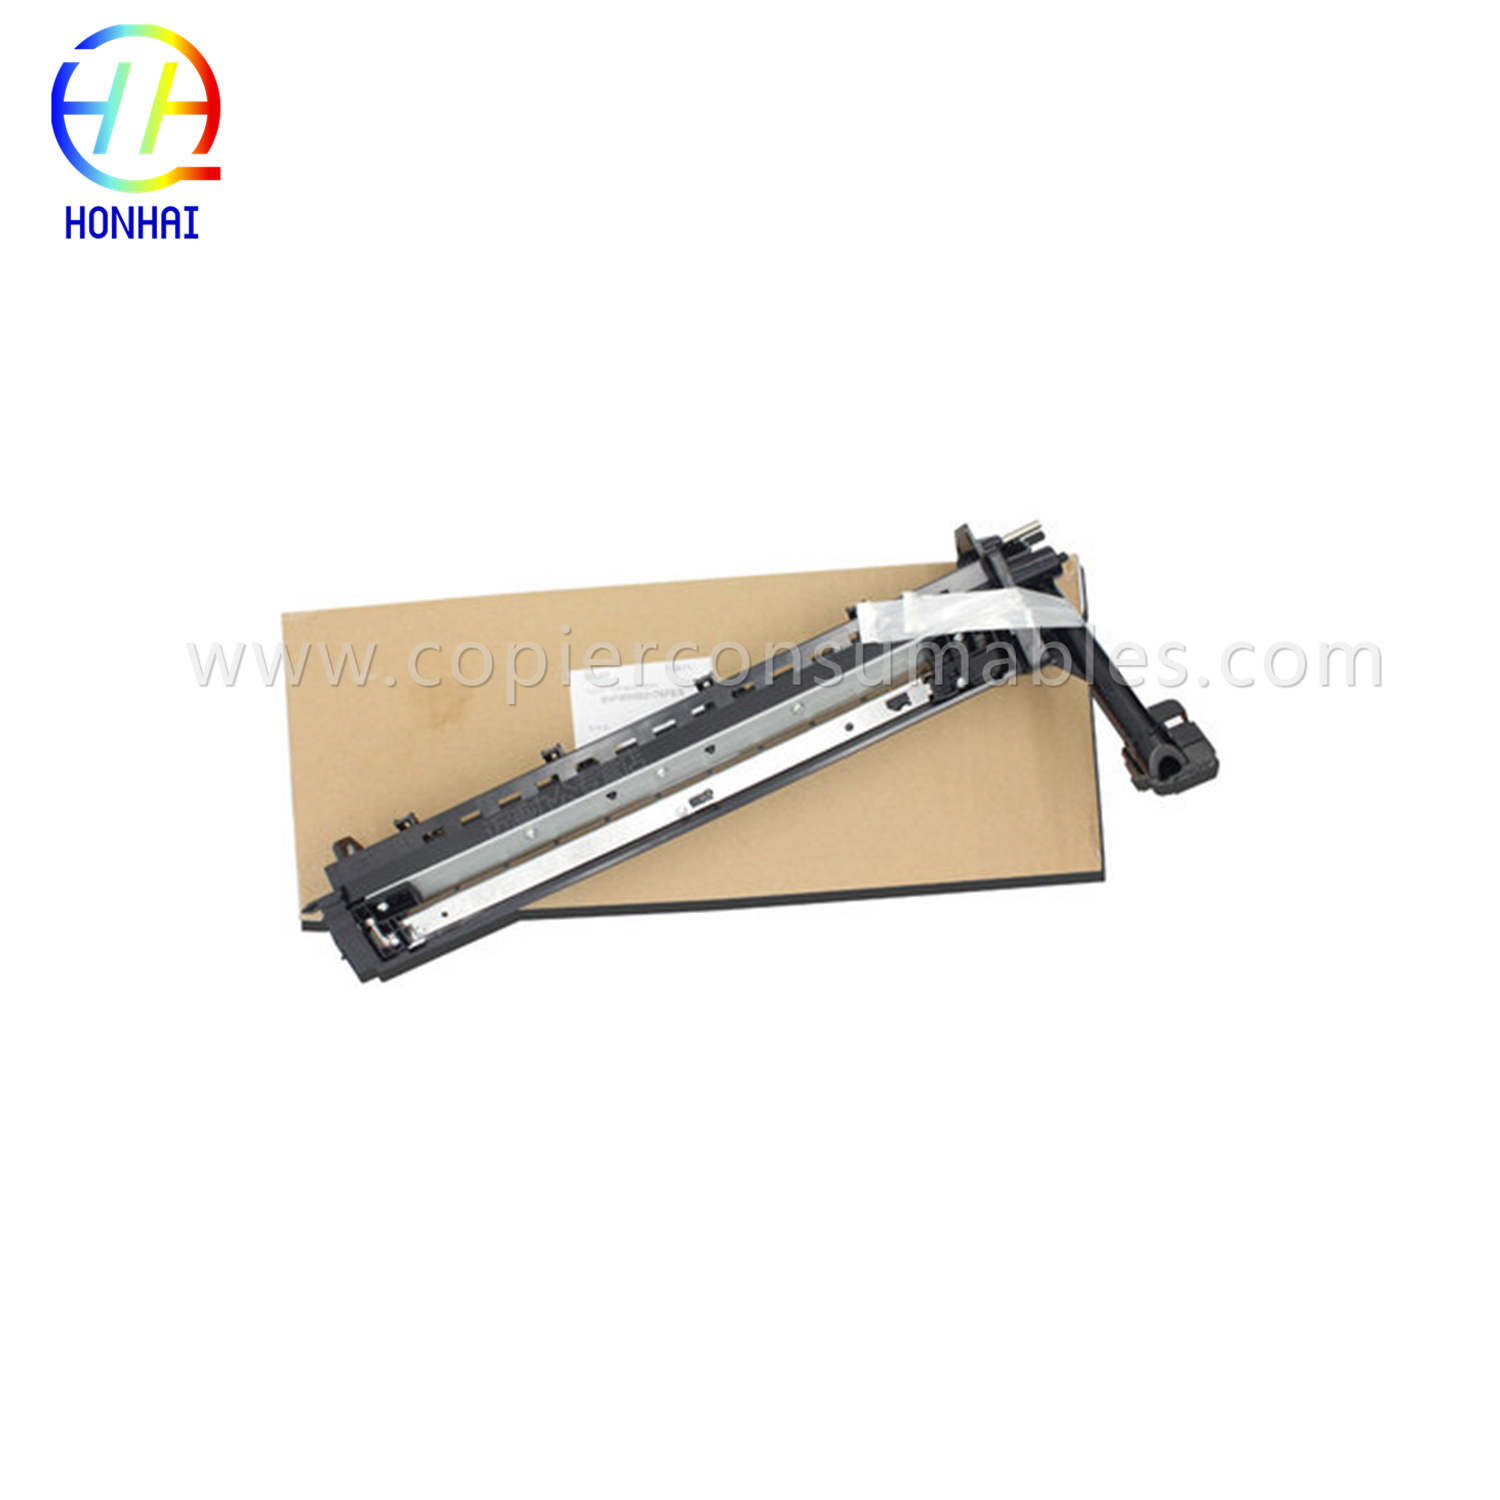 Drum Frame Assembly para sa Sharp Ar-5320 5320d Arm-160 162 205 207 (Sharp CFRM-0021RS5T CFRM-0021RS6D Toshiba 6LS11678000) OEM